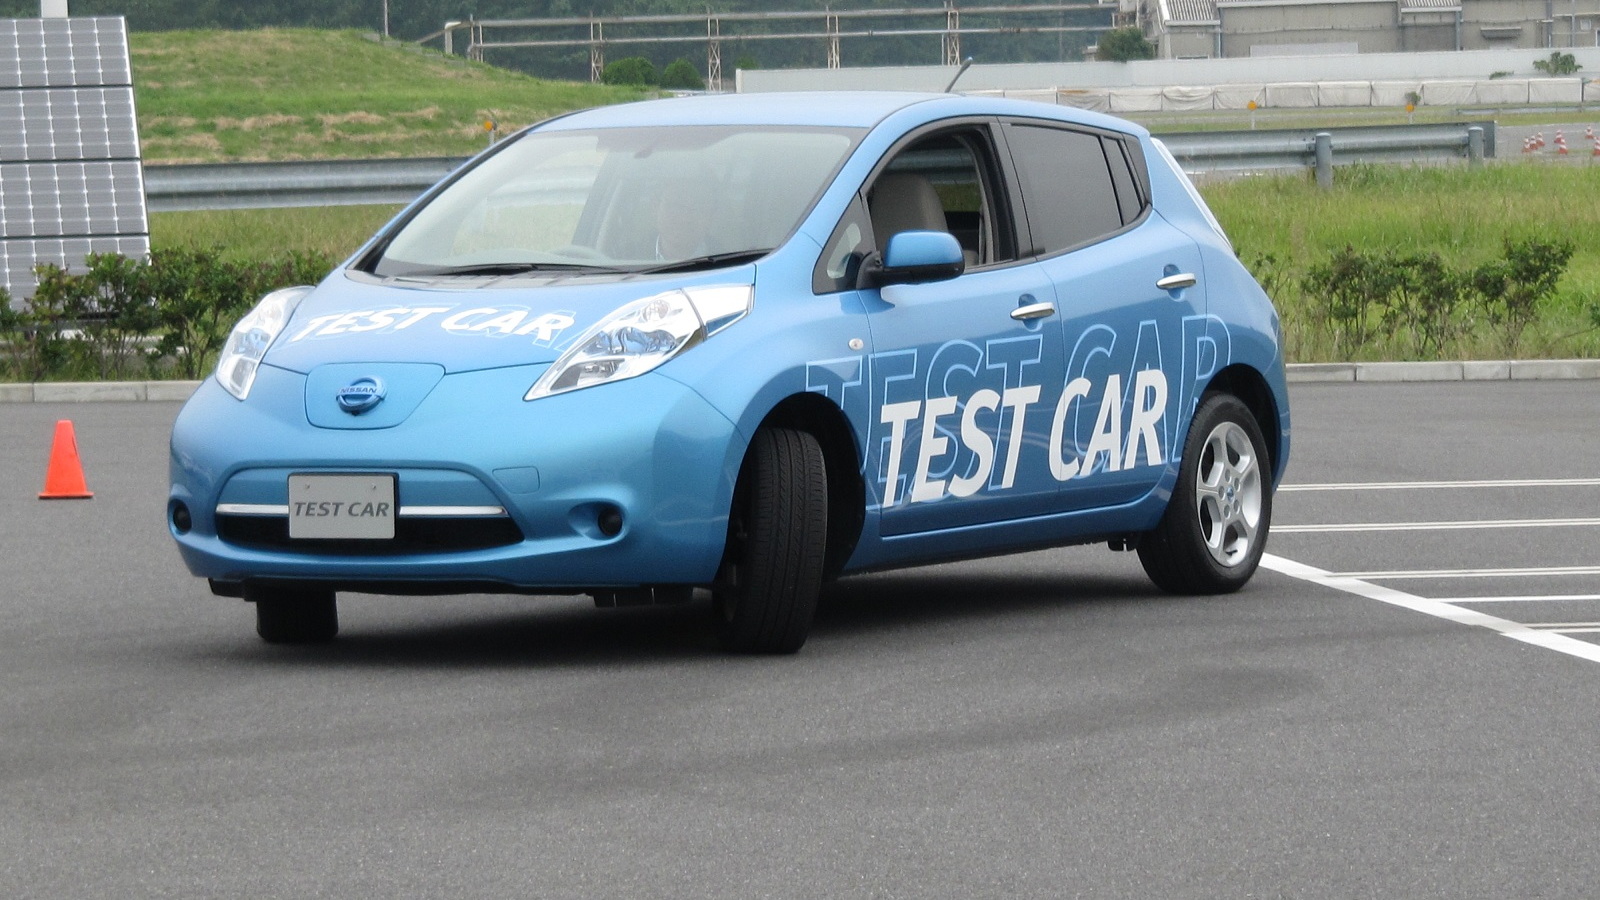 Nissan Leaf with automatic parking location to position over a wireless charging pad, Oppama, Japan